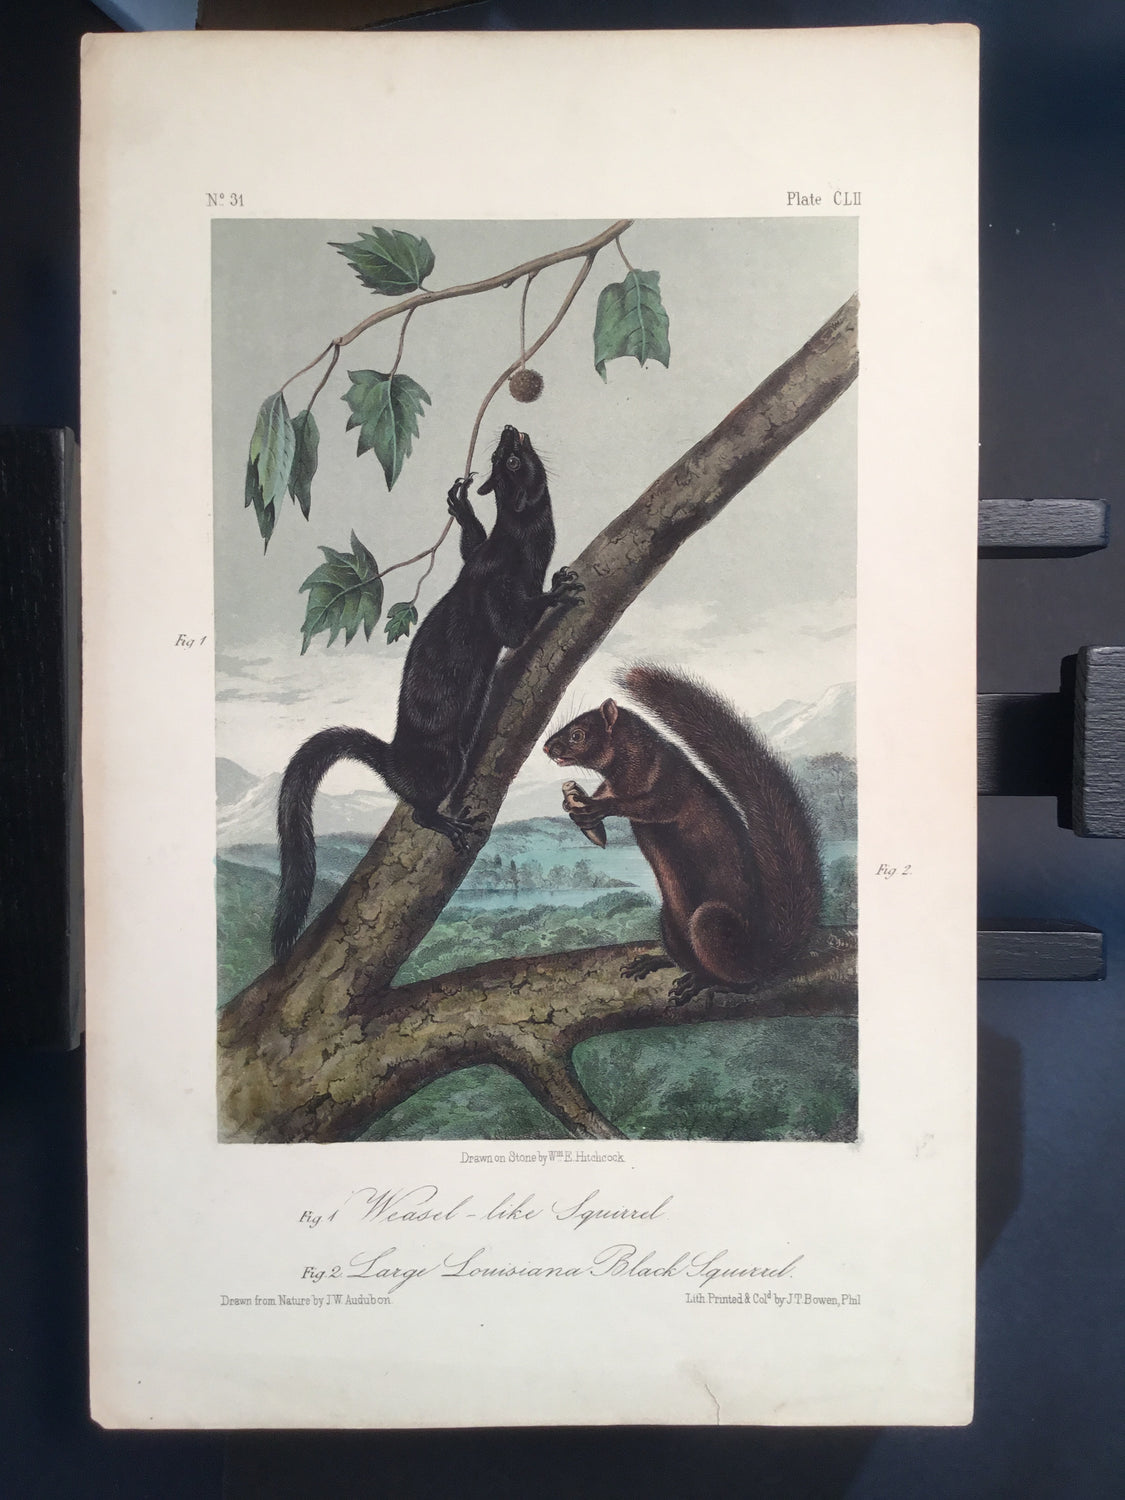 Lord-Hopkins Collection - Weasel and Louisiana Squirrel